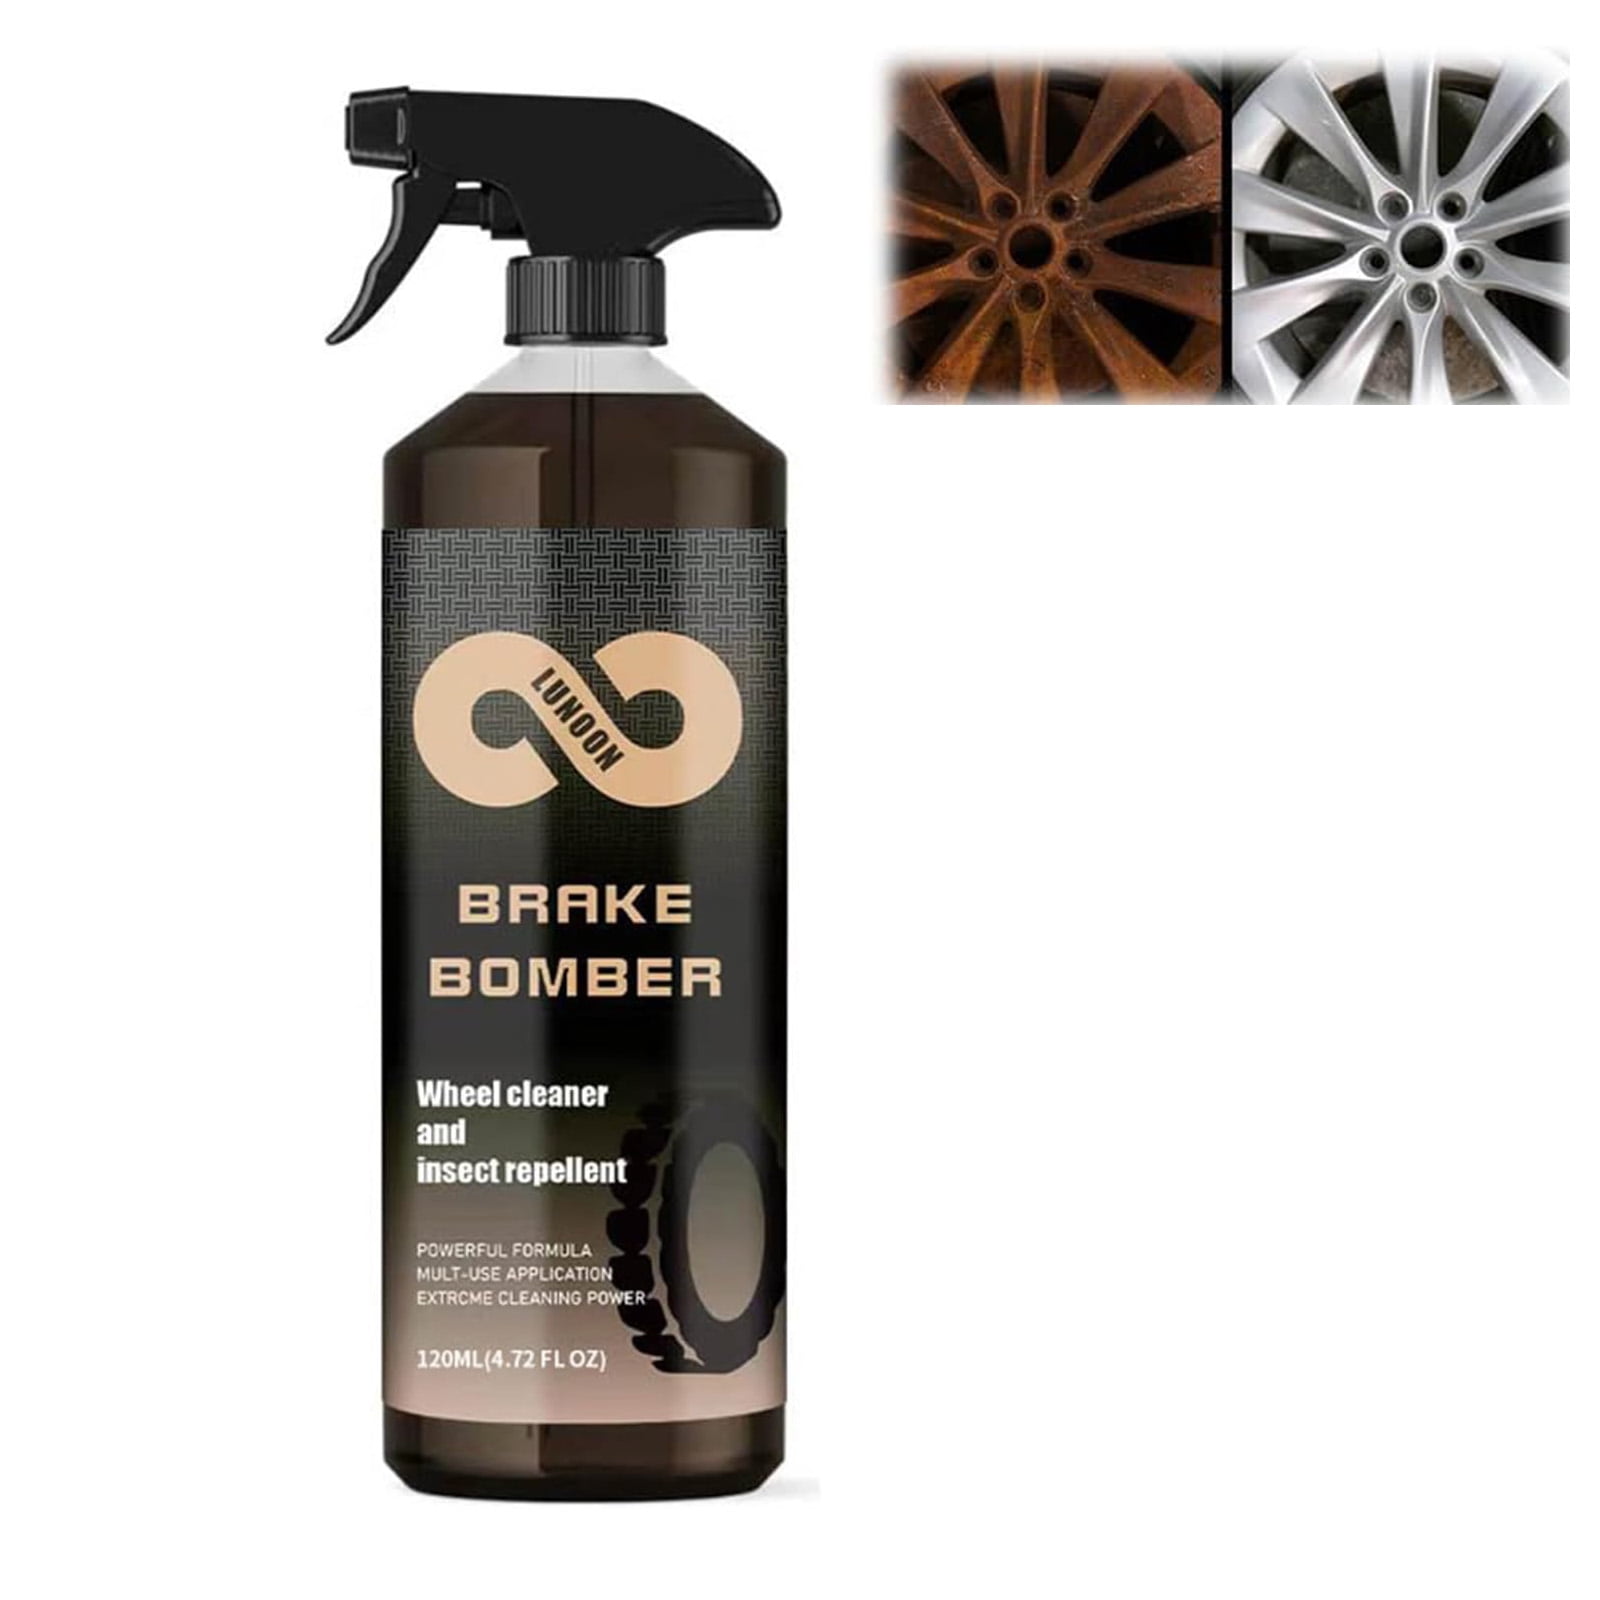 Stealth Garage Brake Bomber: Non-Acid Wheel Cleaner, Perfect for Cleaning  Wheels and Tires, Rim Cleaner & Brake Dust Remover, Safe on Alloy, Chrome